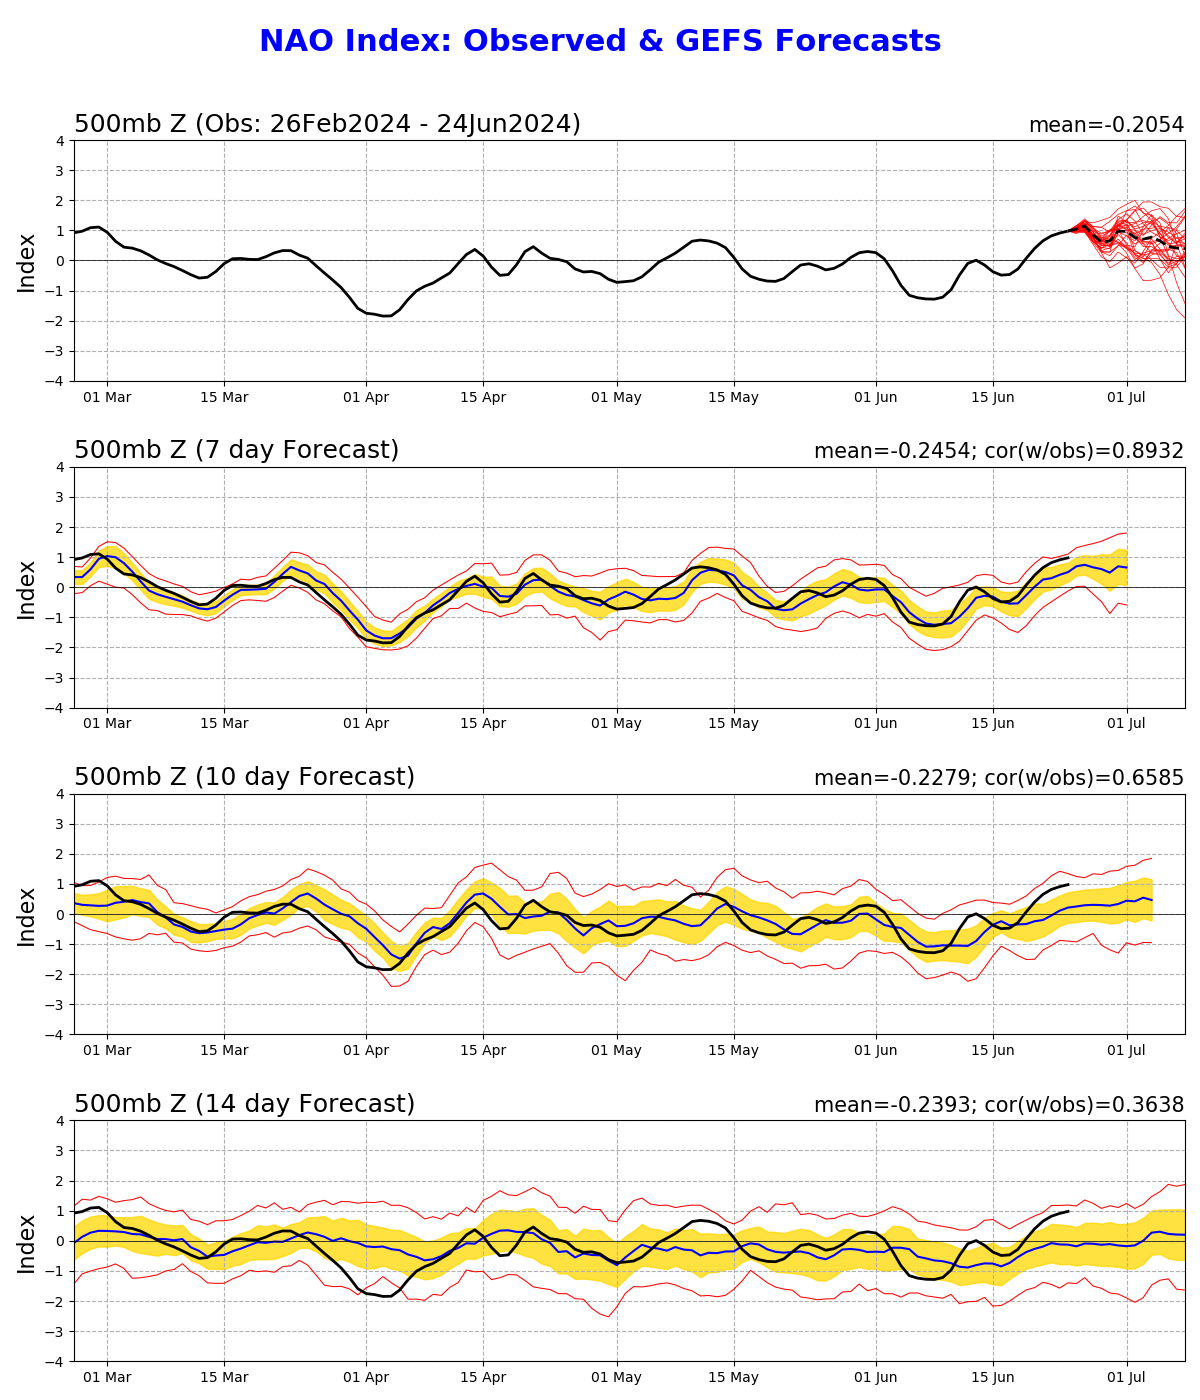 https://www.cpc.ncep.noaa.gov/products/precip/CWlink/pna/nao.gefs.sprd2.png